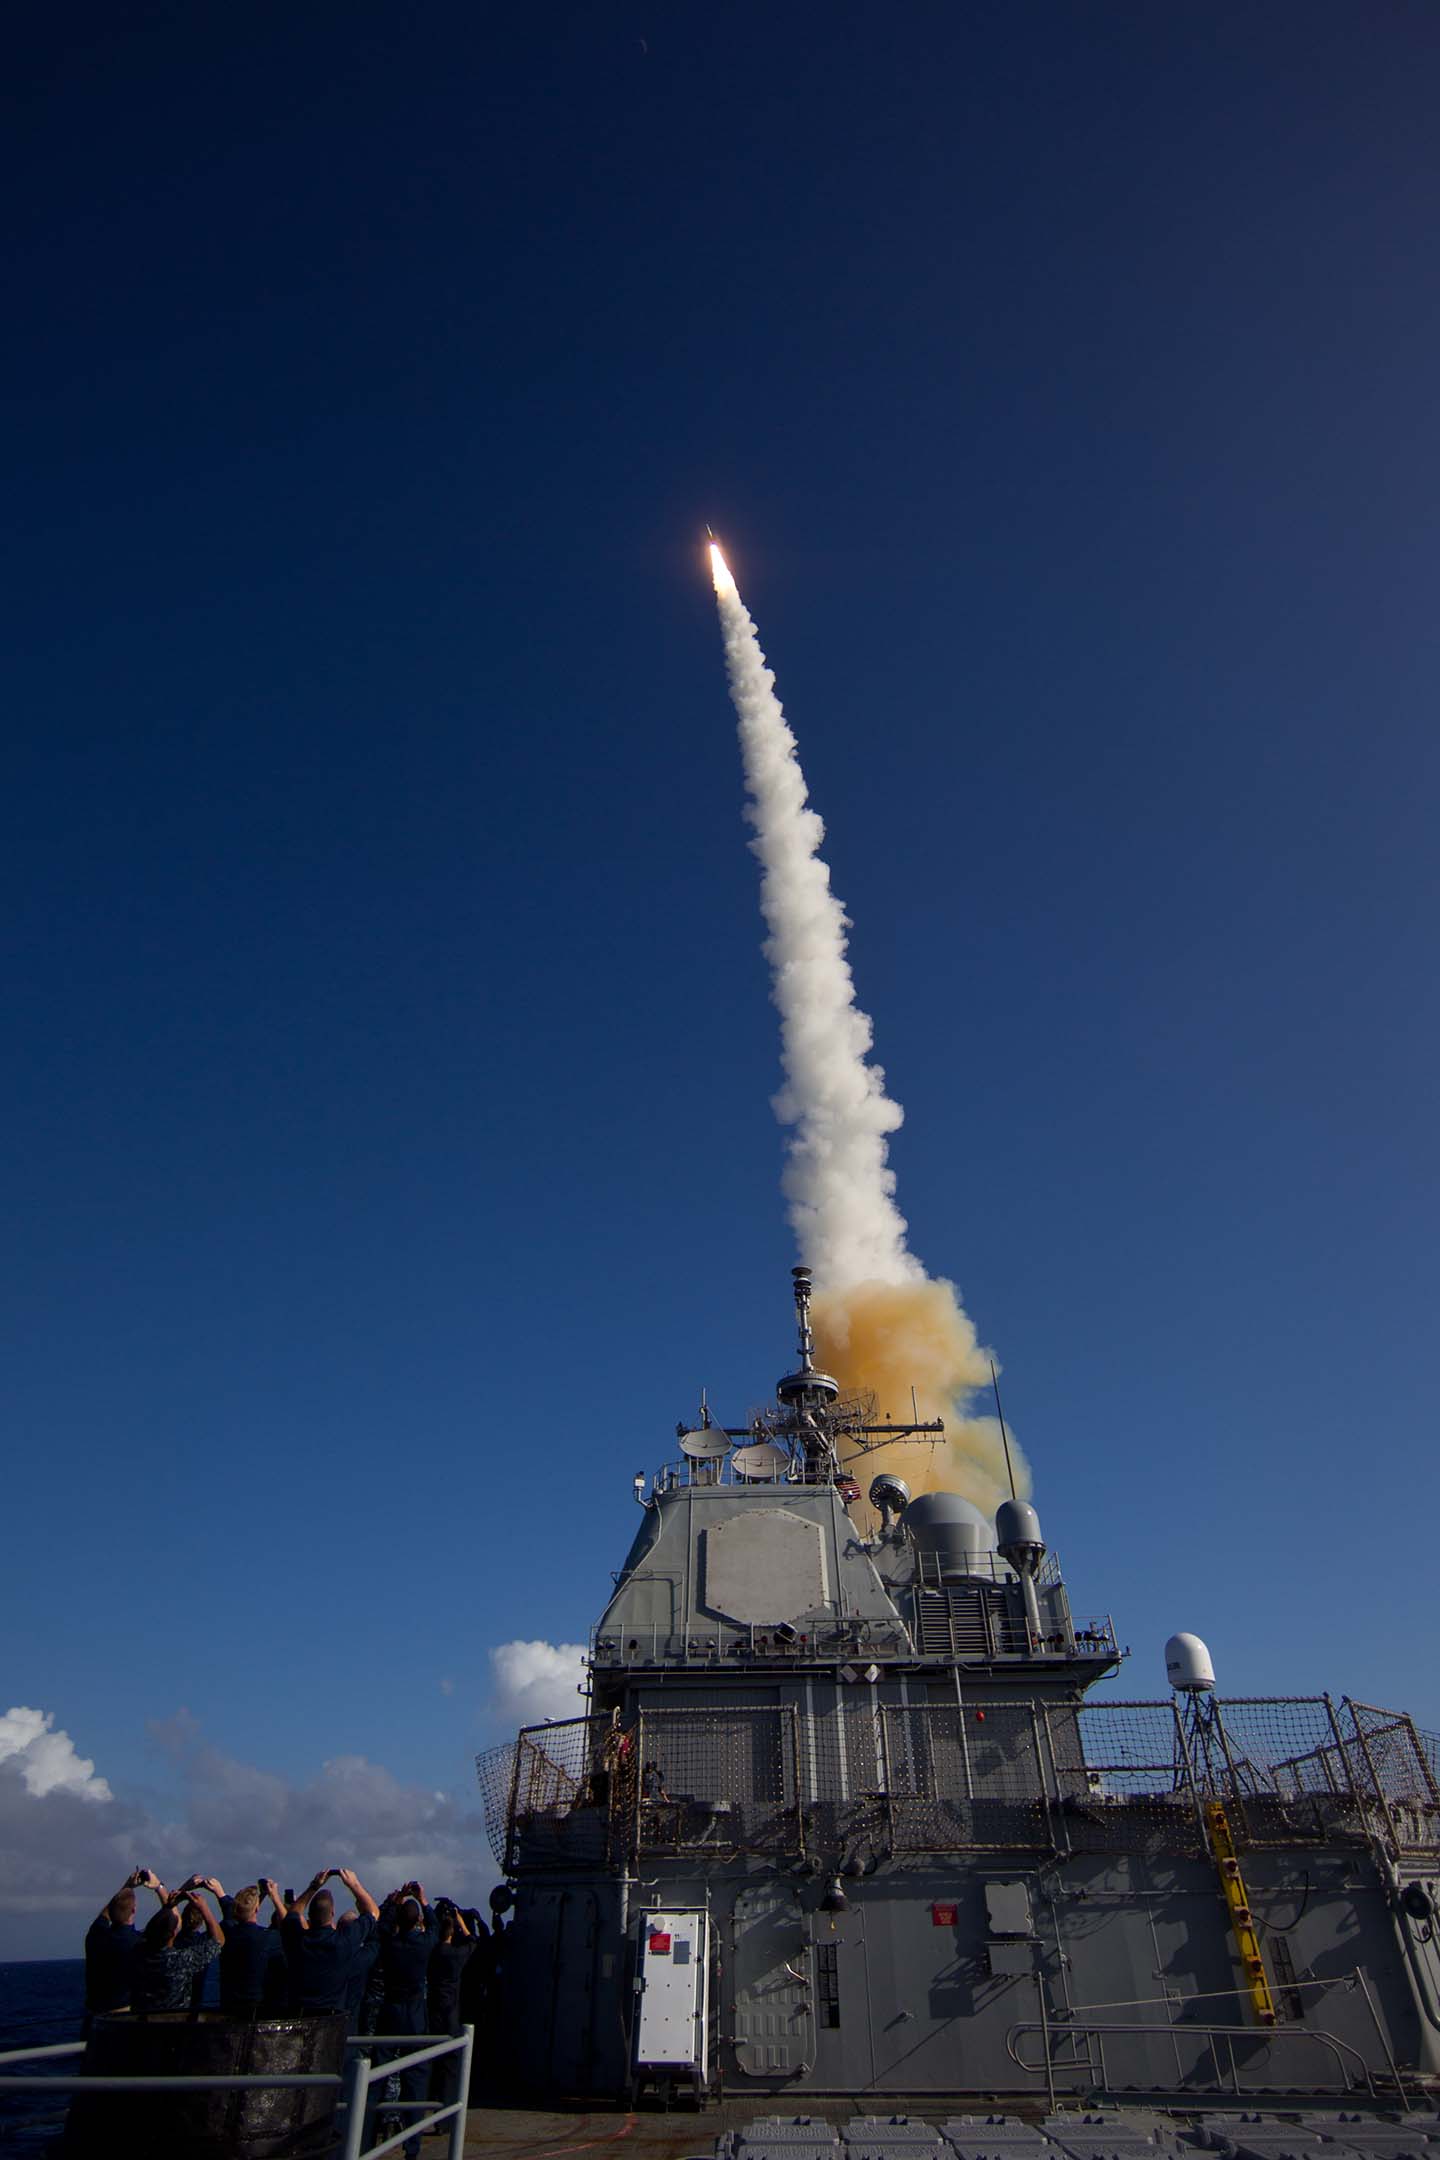 A Standard Missile-3 (SM-3) Block 1B interceptor is launched from the USS Lake Erie (CG 70)